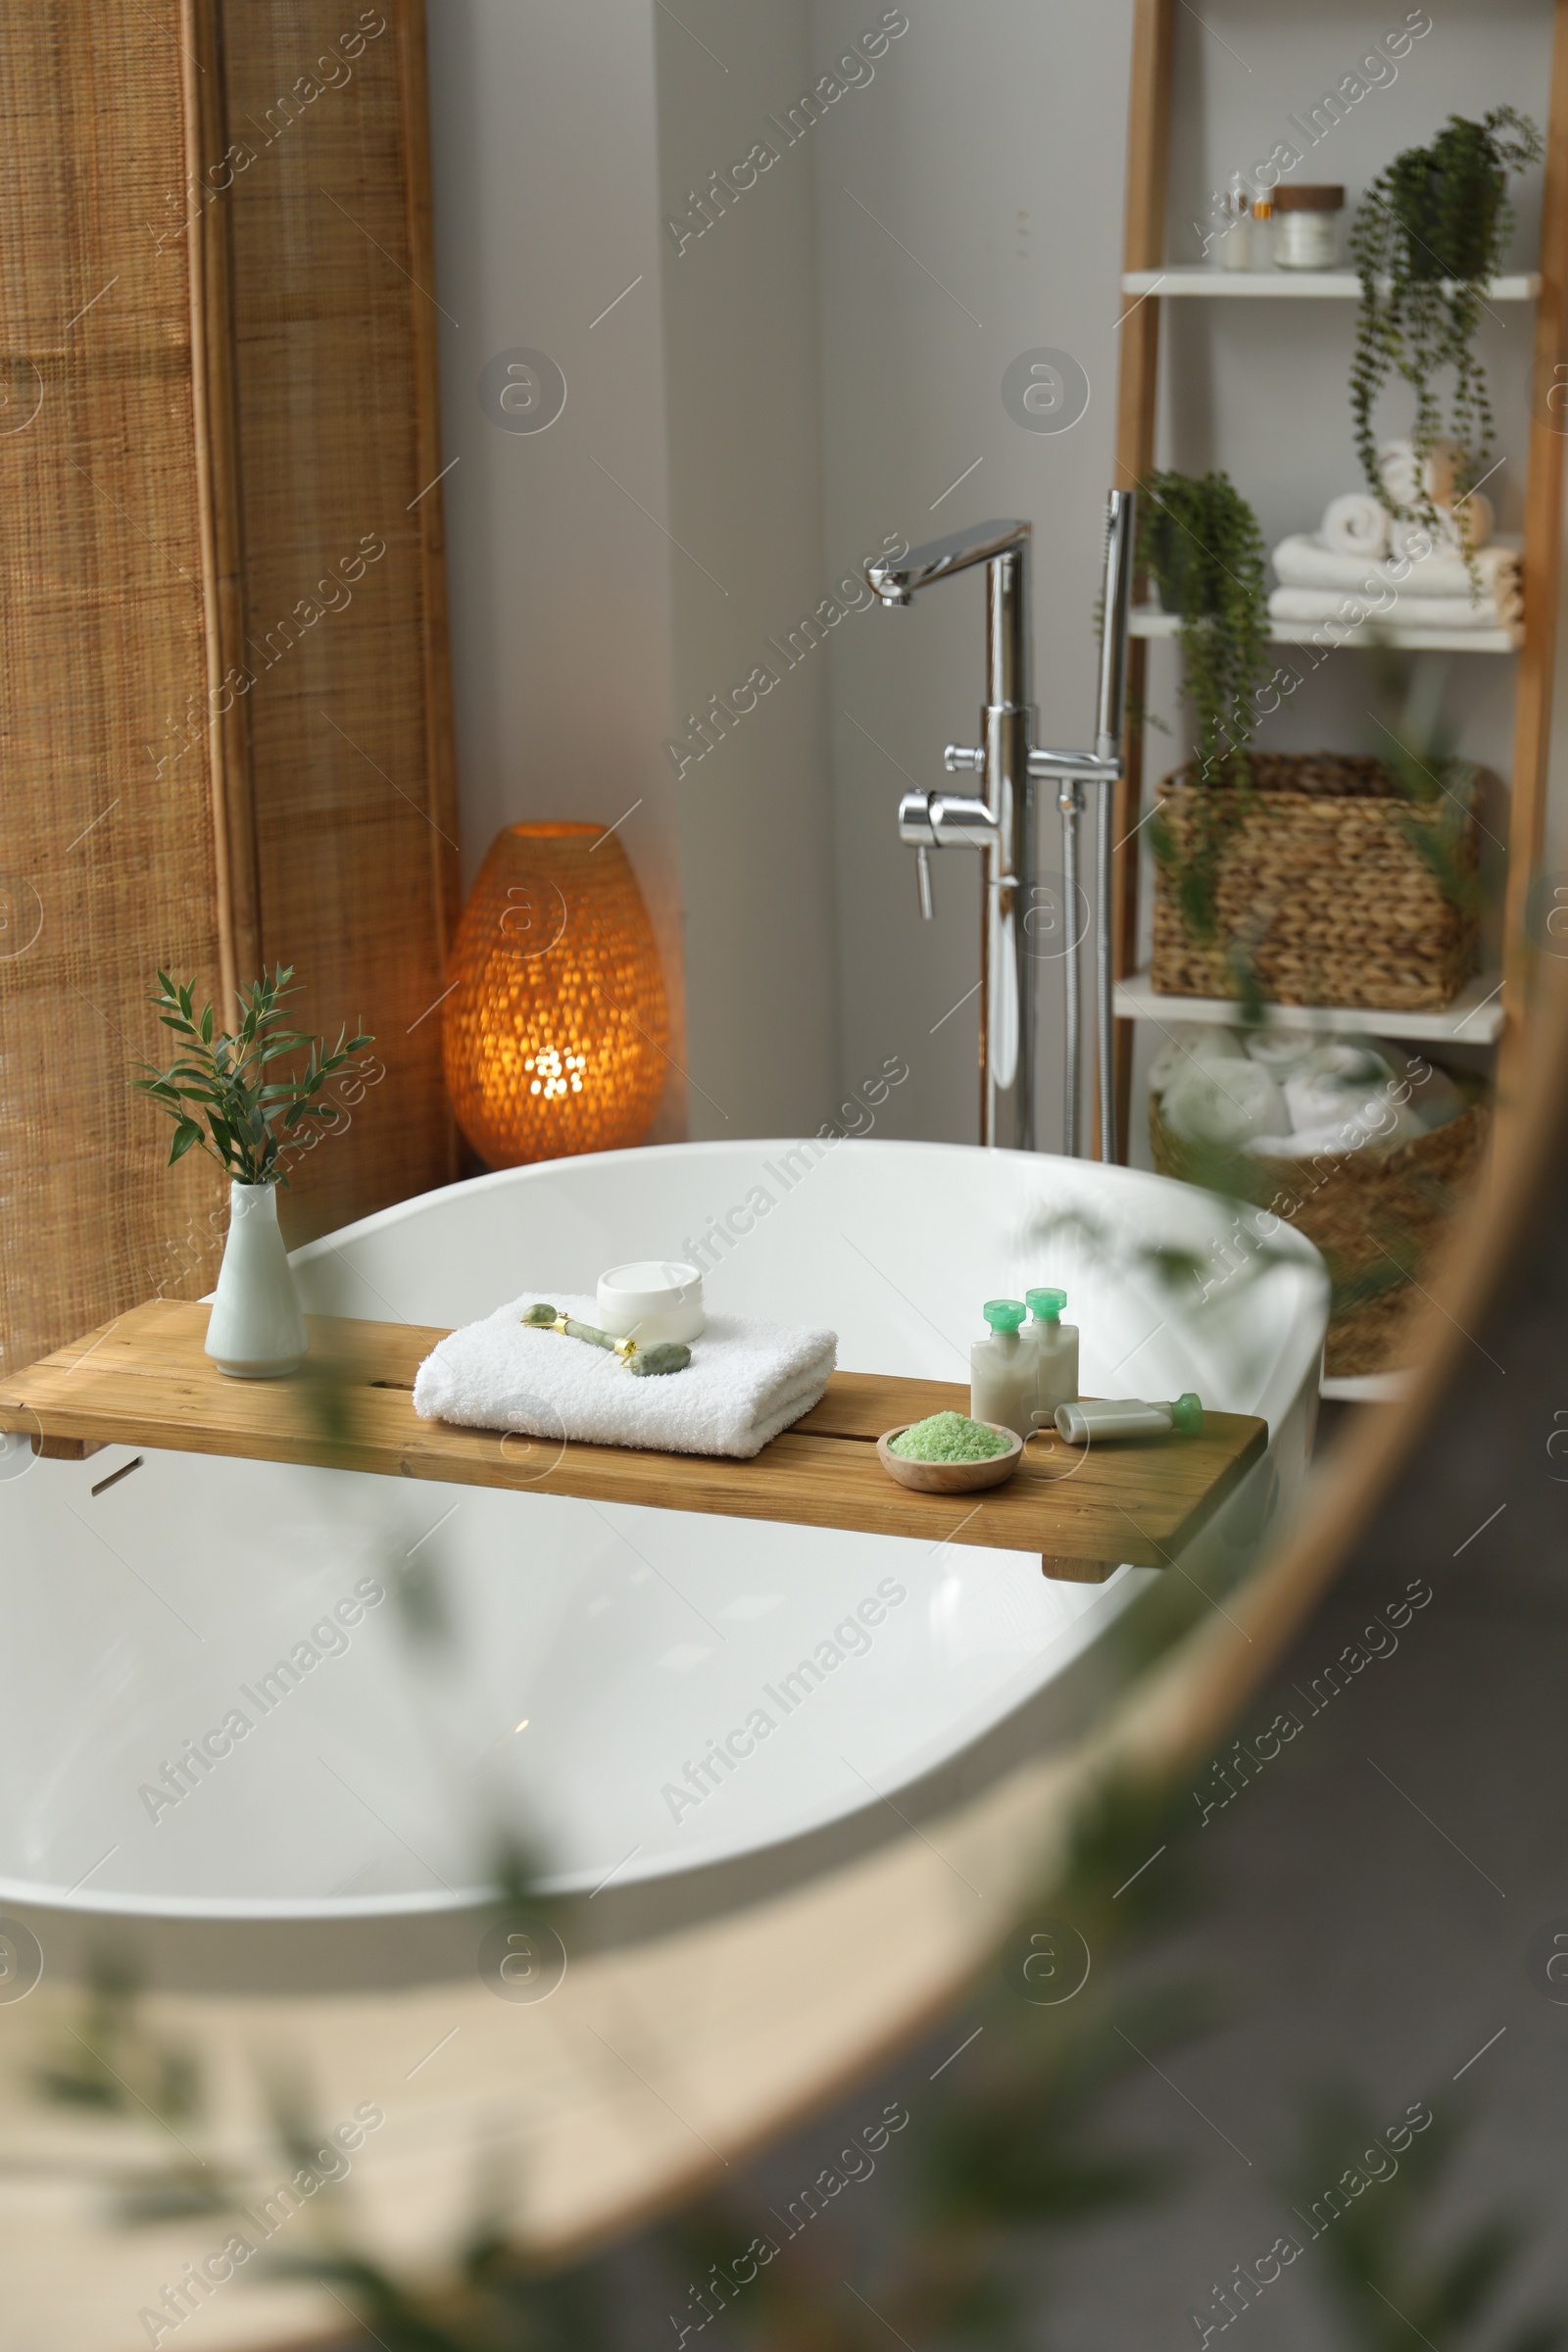 Photo of Wooden tray with spa products and green branches on bath tub in bathroom, reflection in mirror